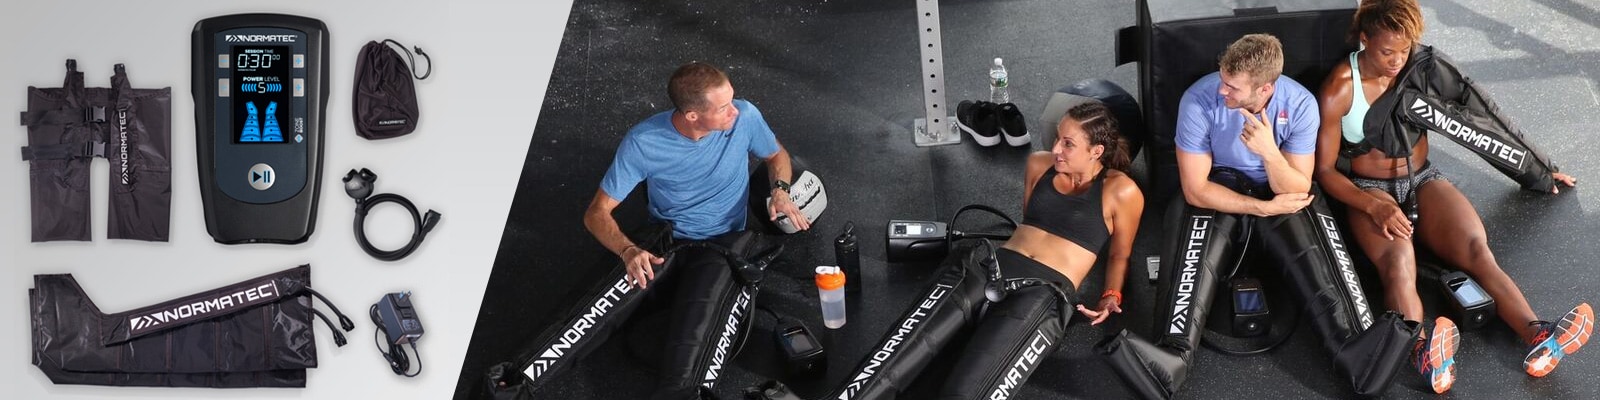 NormaTec PULSE Recovery System - Henry Schein Medical Athletics and Schools